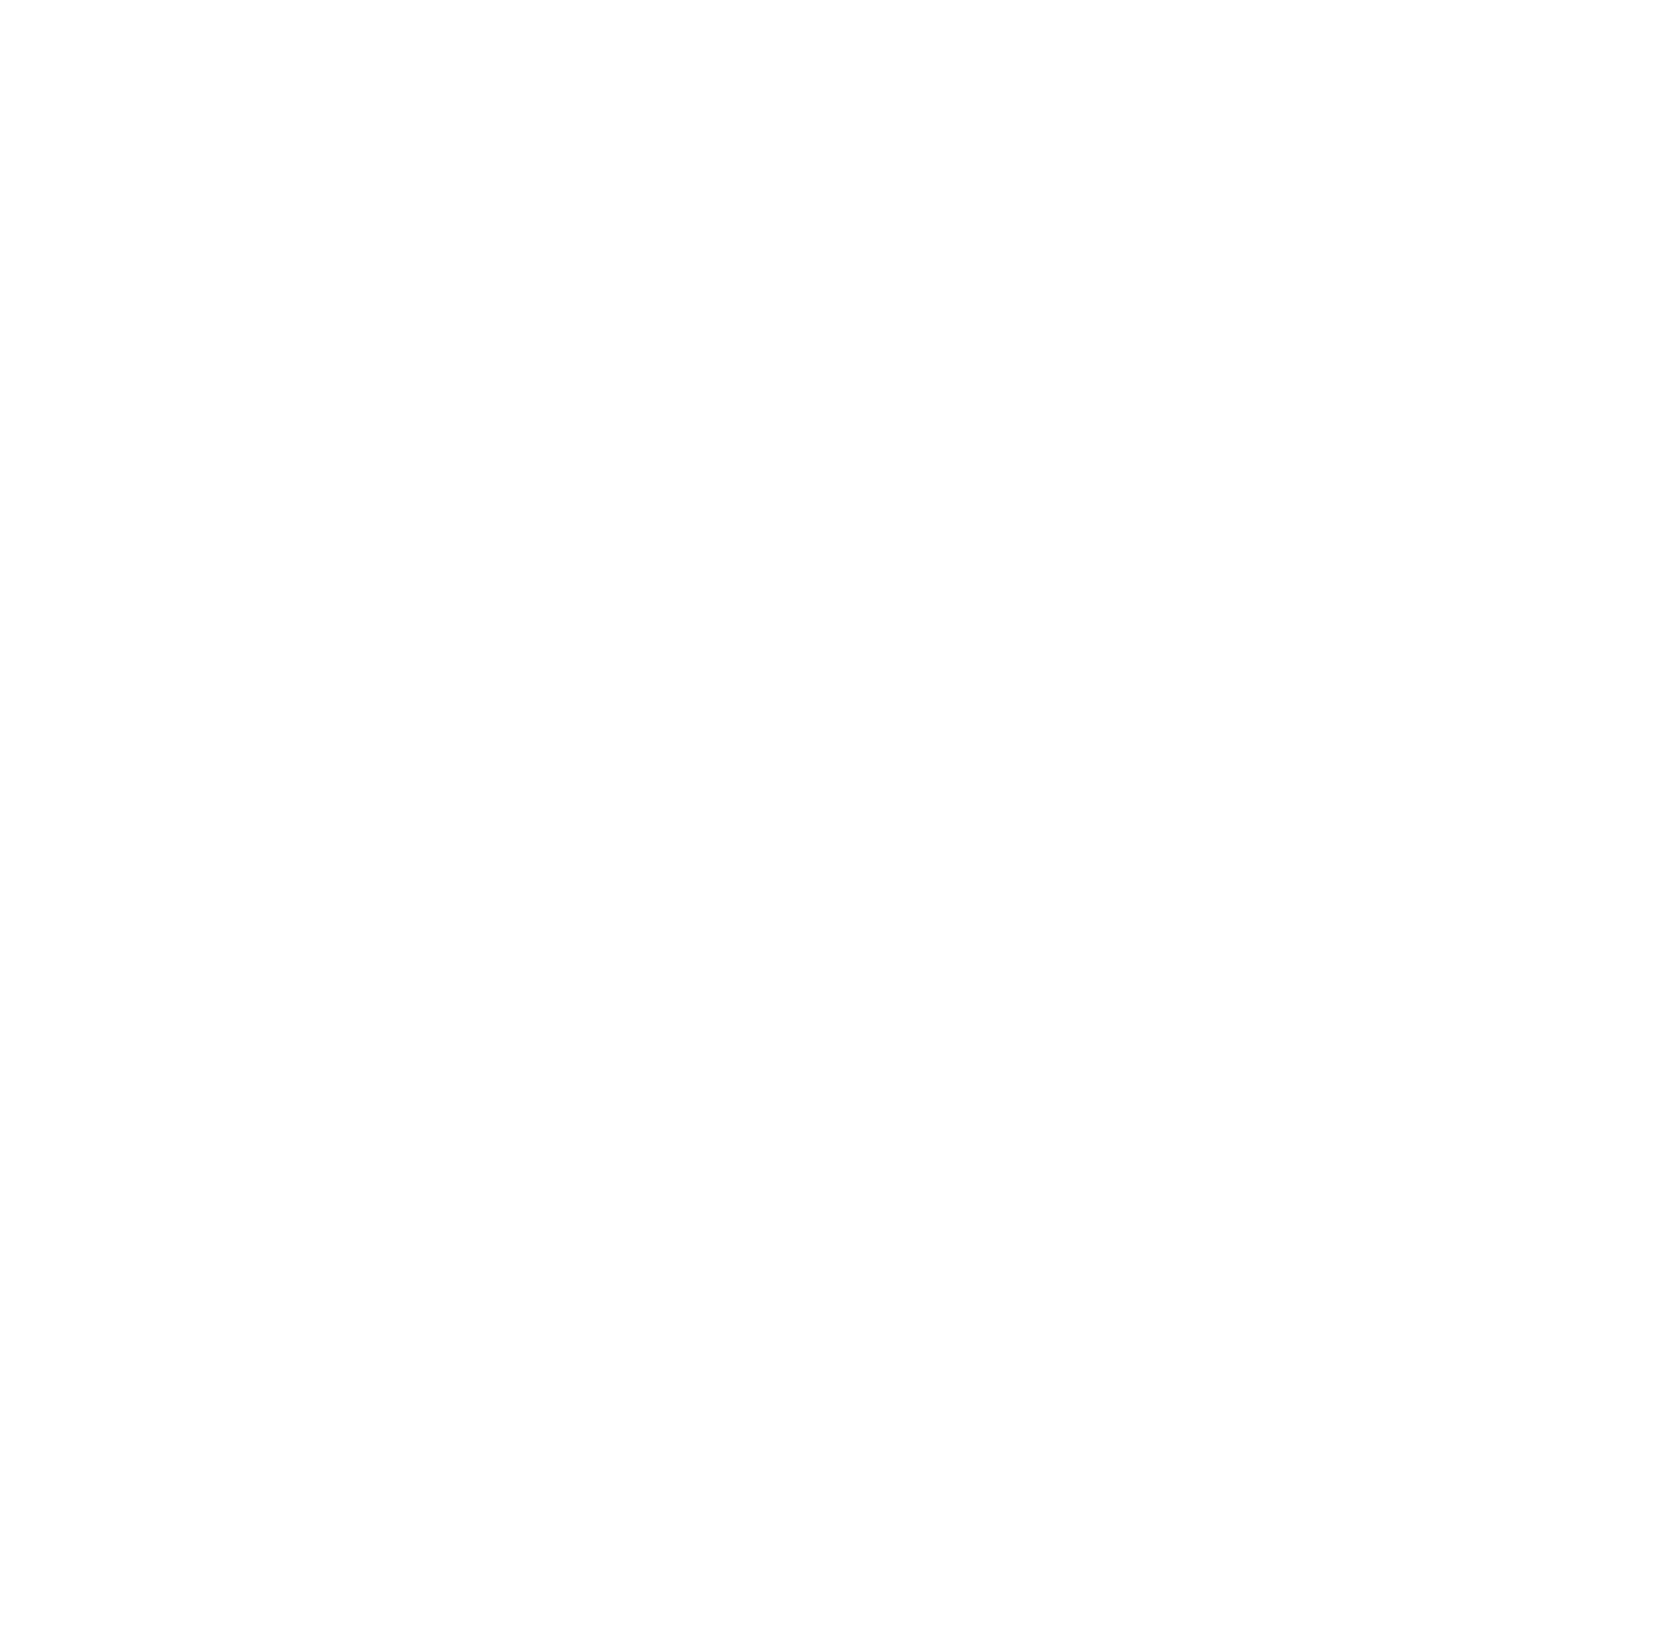 Taiwan Cooperative Financial logo for dark backgrounds (transparent PNG)